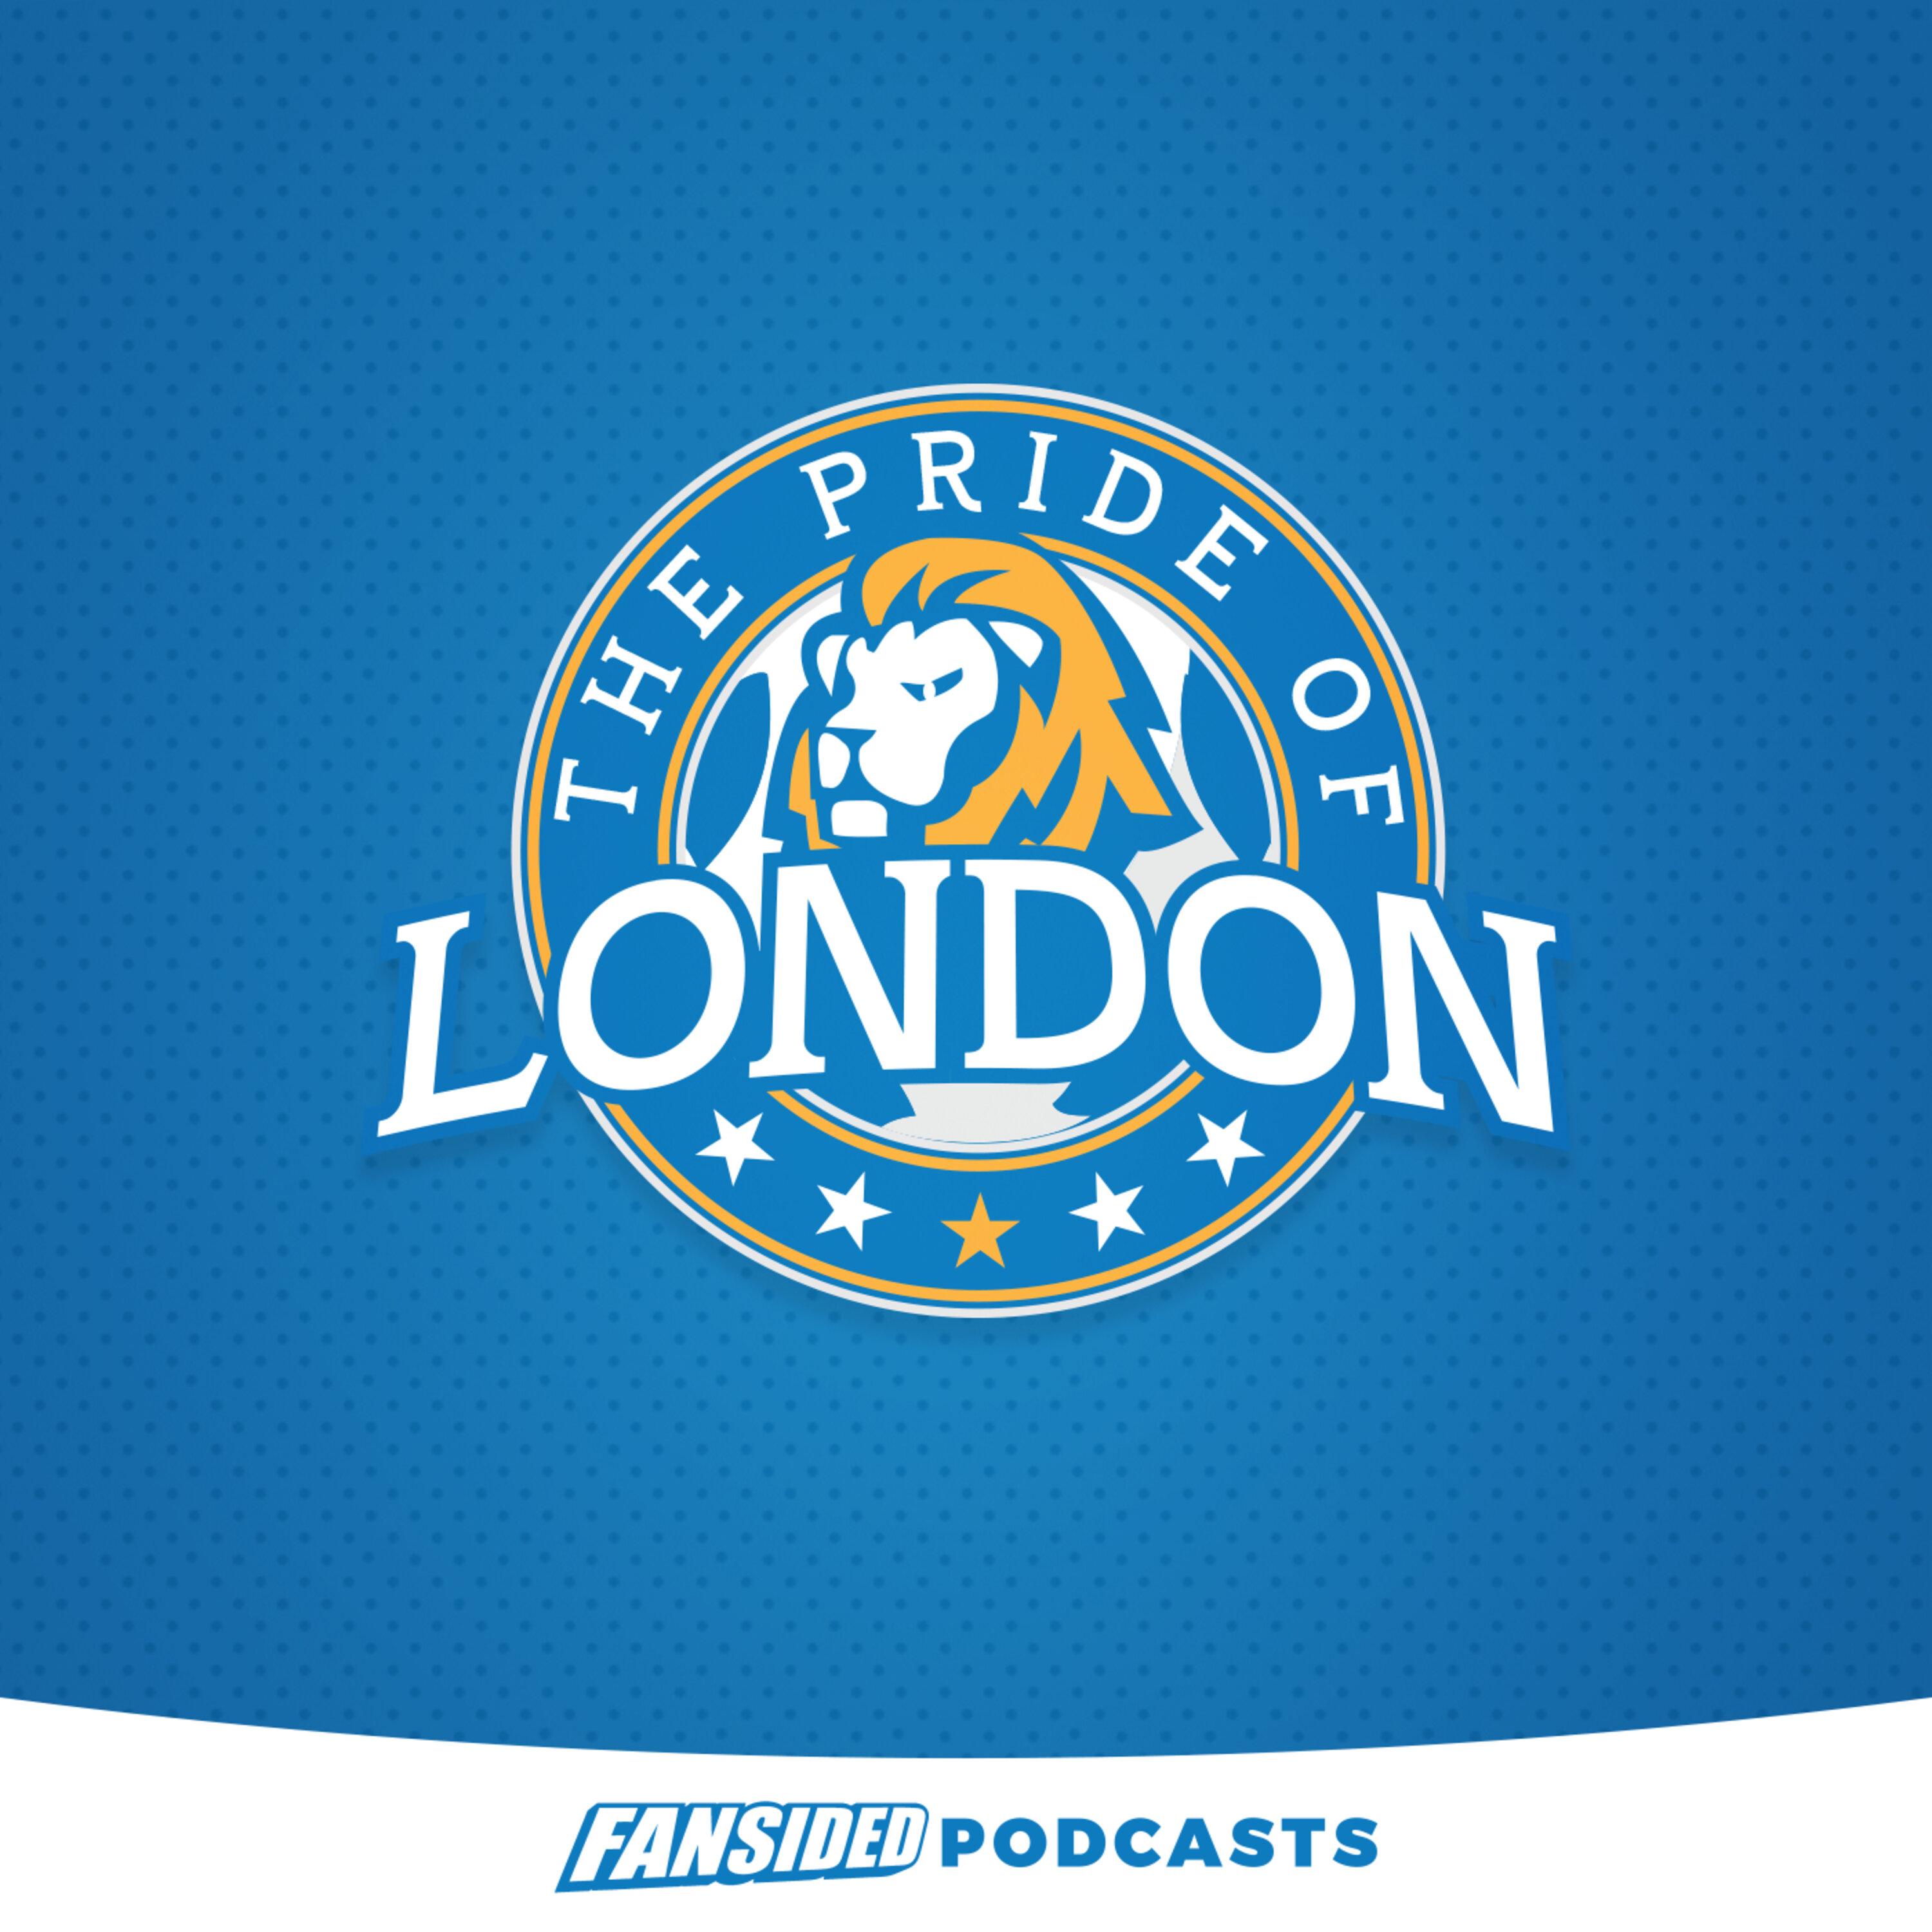 The Pride of London Podcast